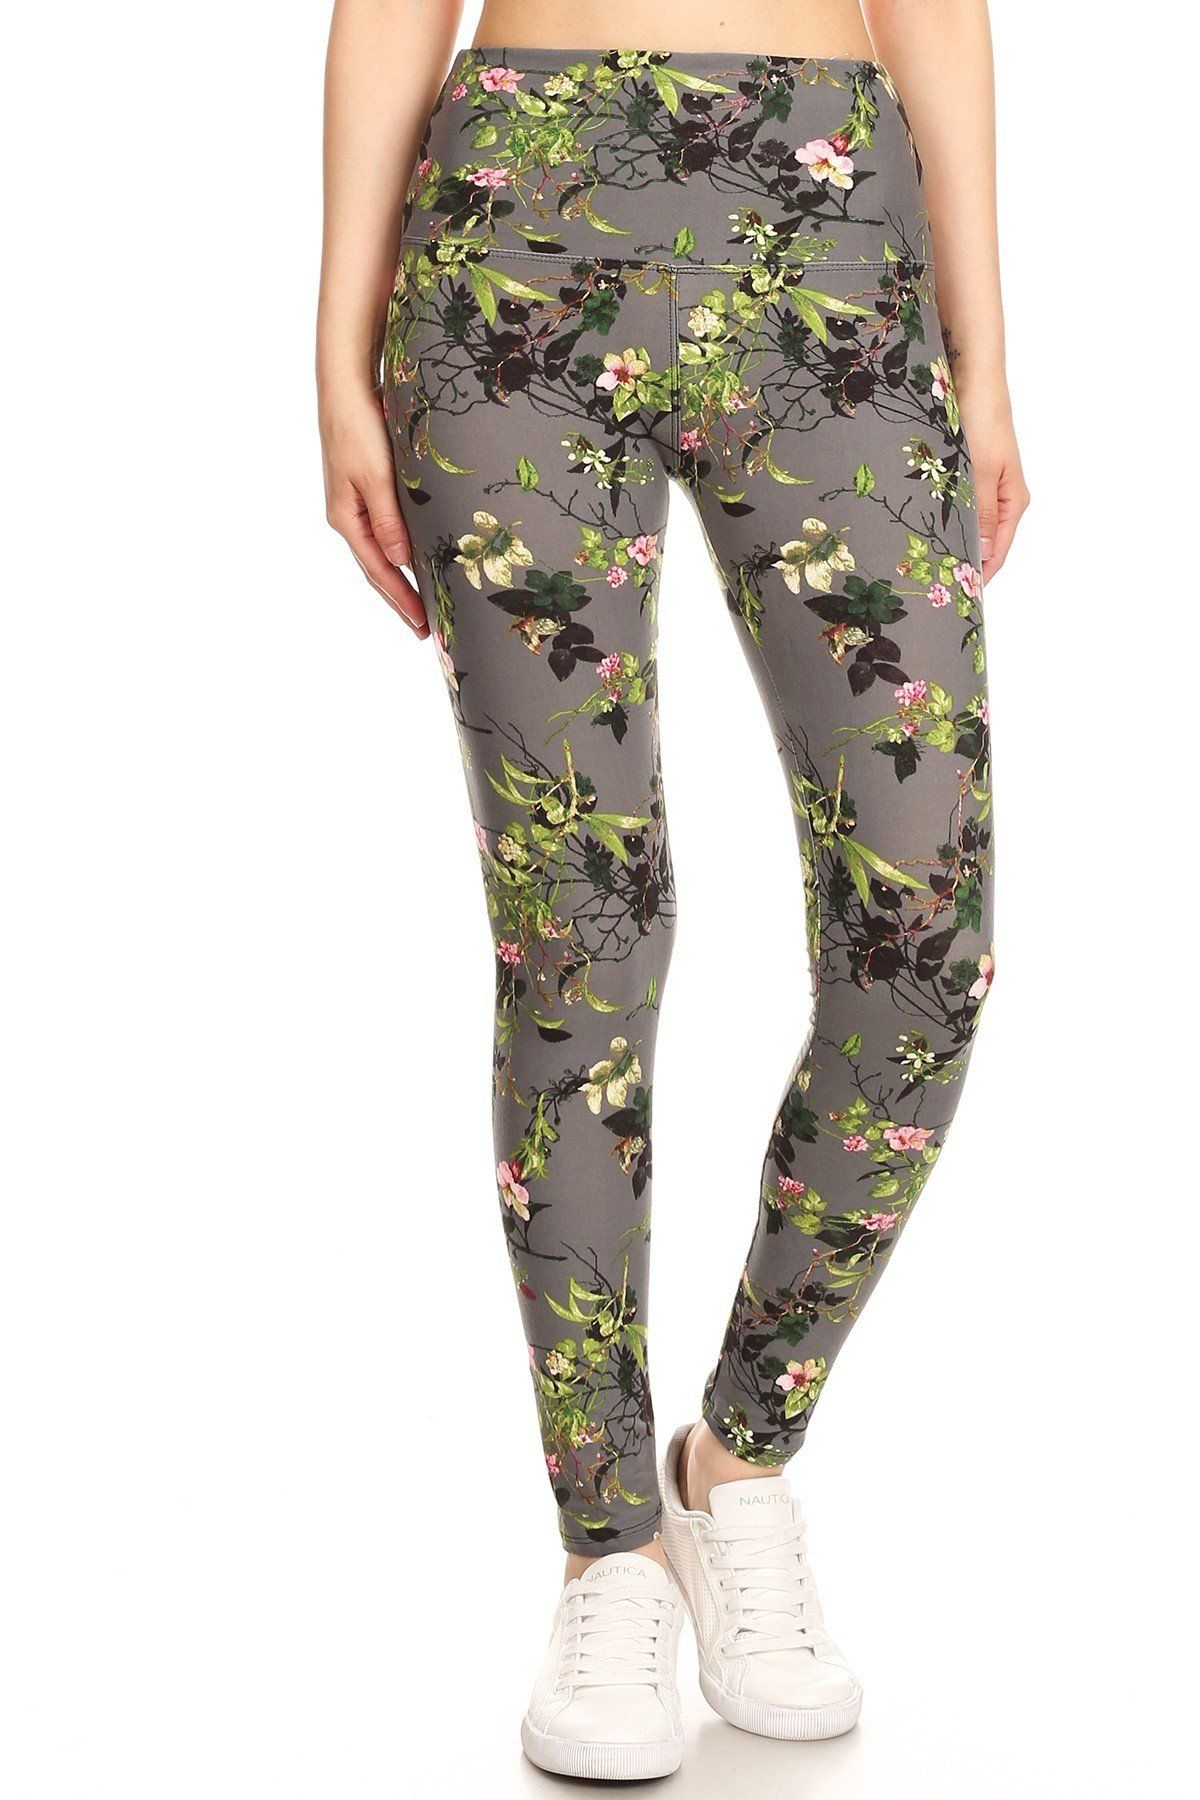 Yoga Style Banded Lined Floral Printed Knit Legging